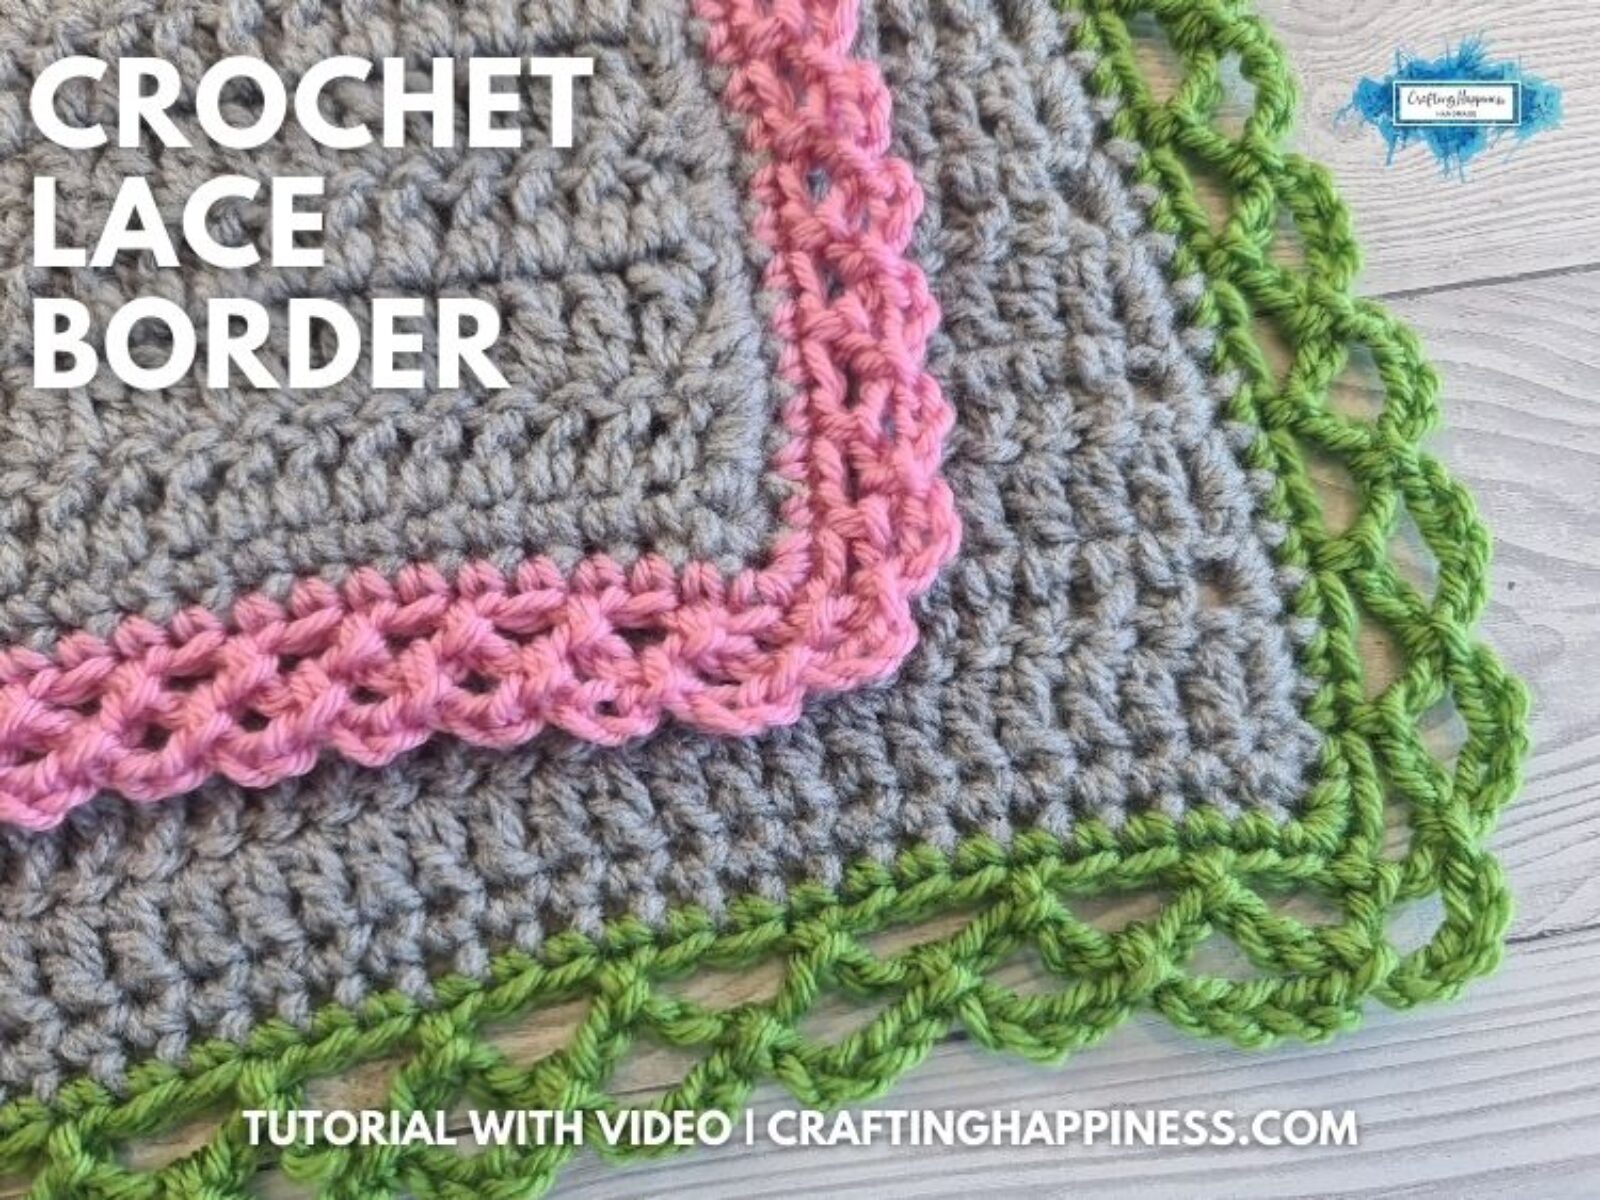 FB BLOG POSTER - Crochet Lace Border Crafting Happiness